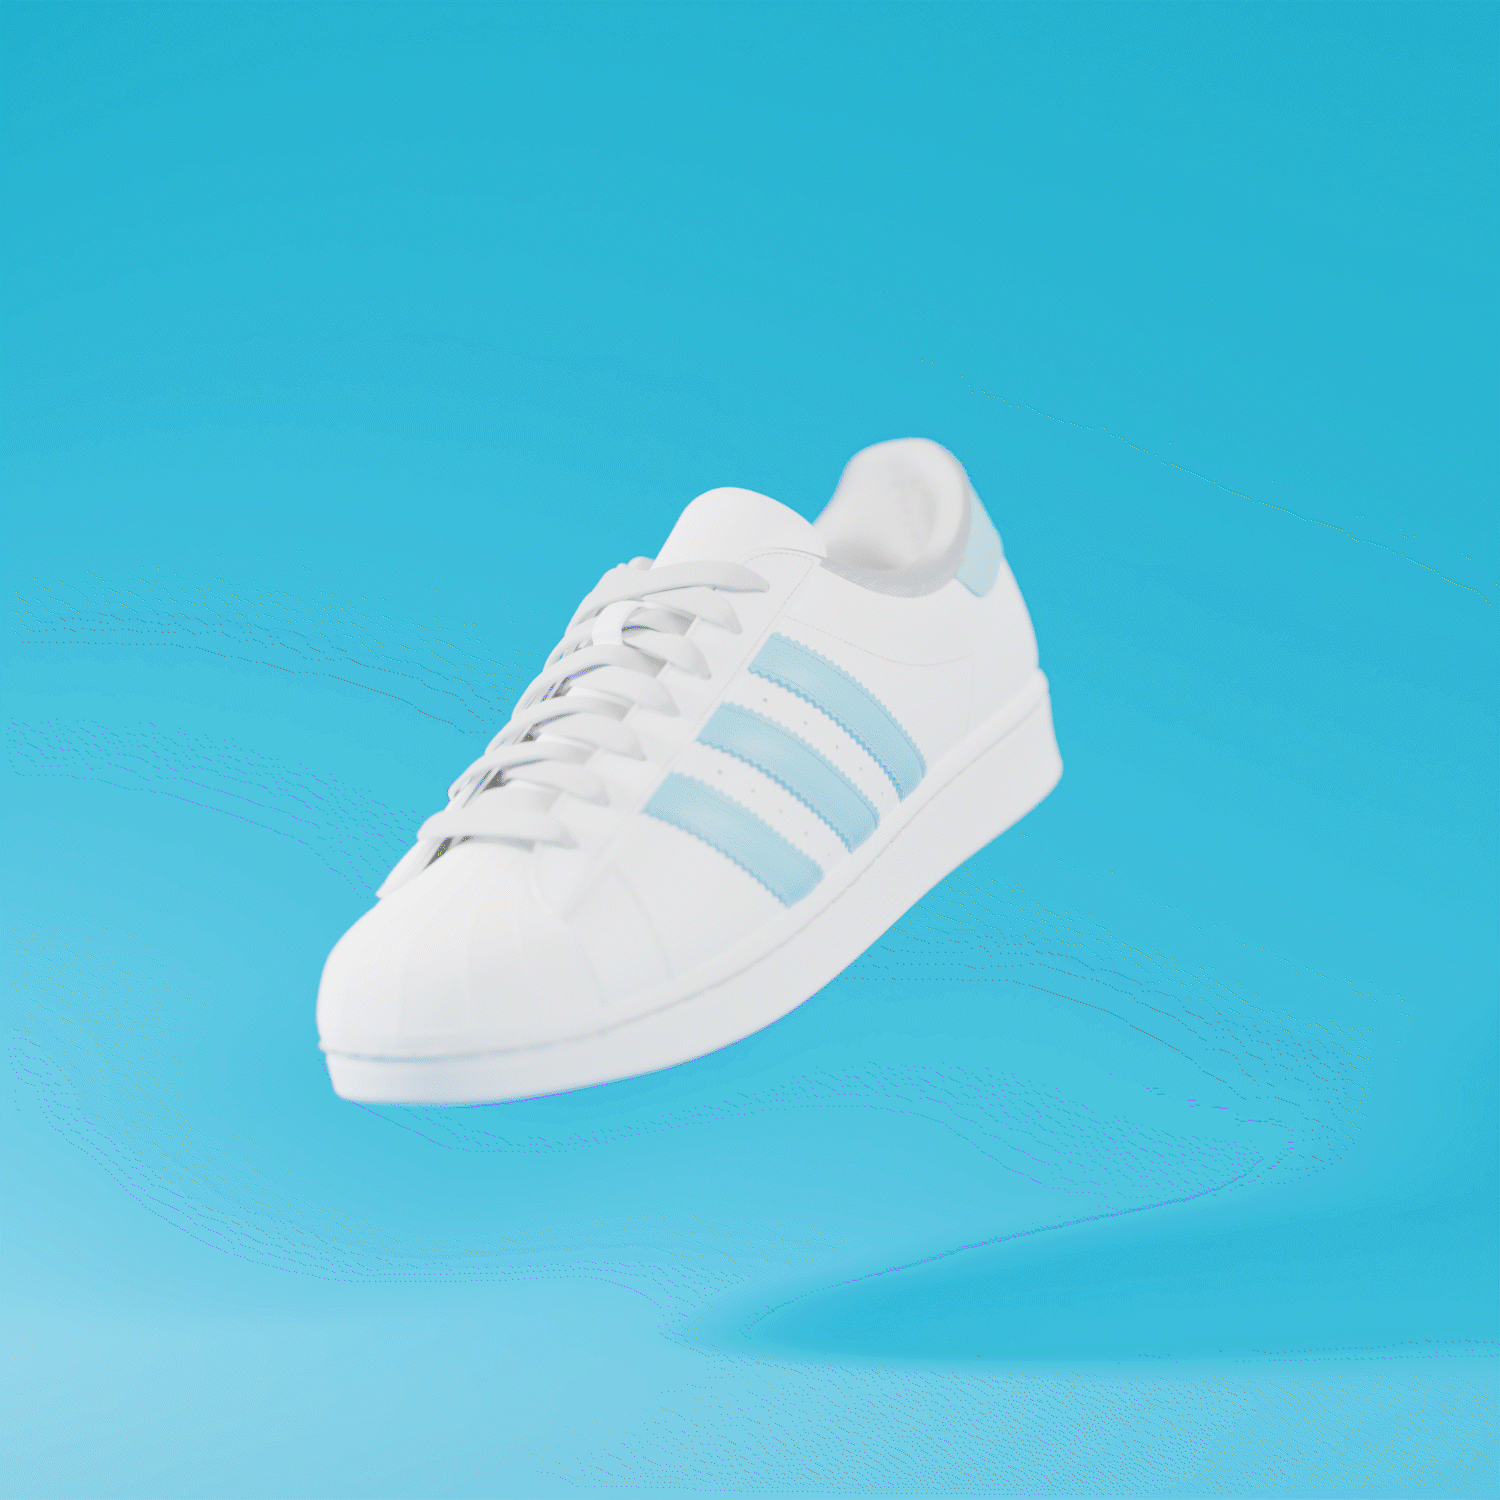 SHOO 3d ad adidas adidas superstar animation branding product ad product render render shoe